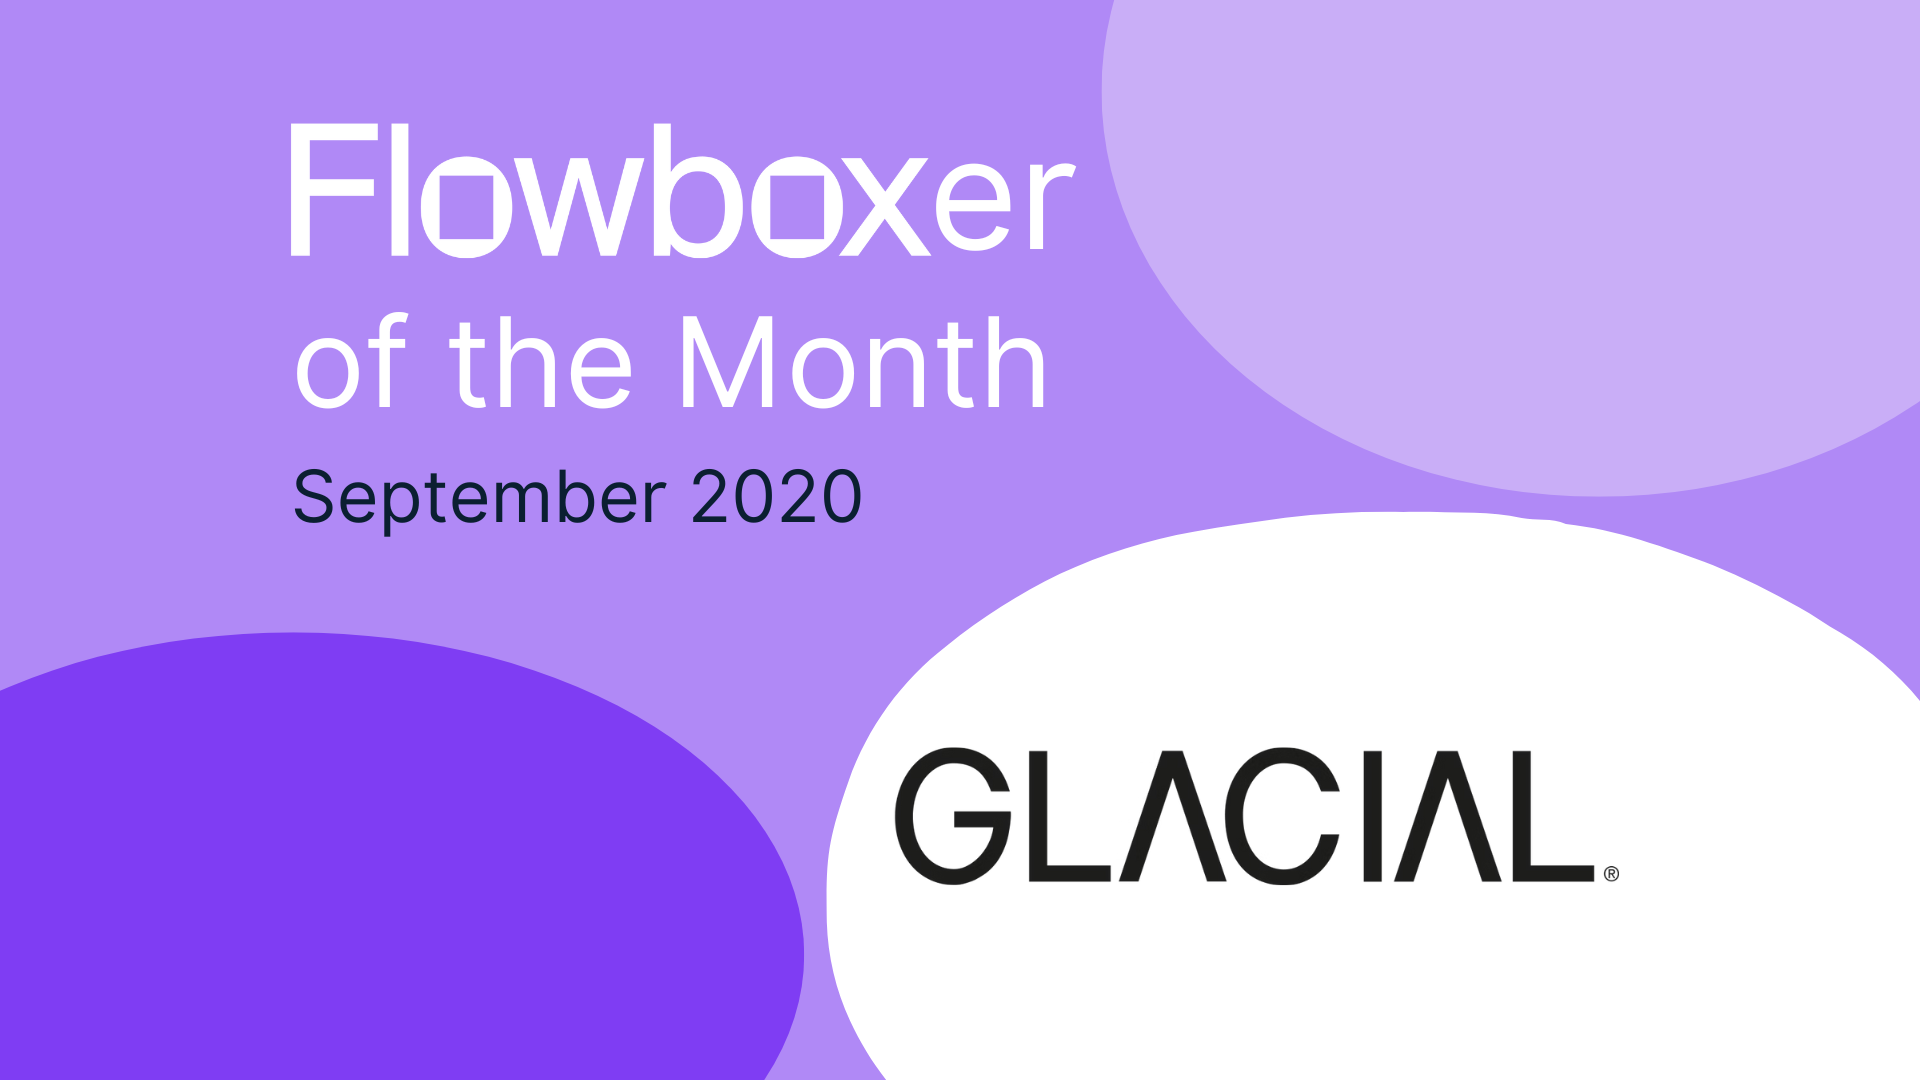 Flowboxer of the Month – September 2020: Glacial